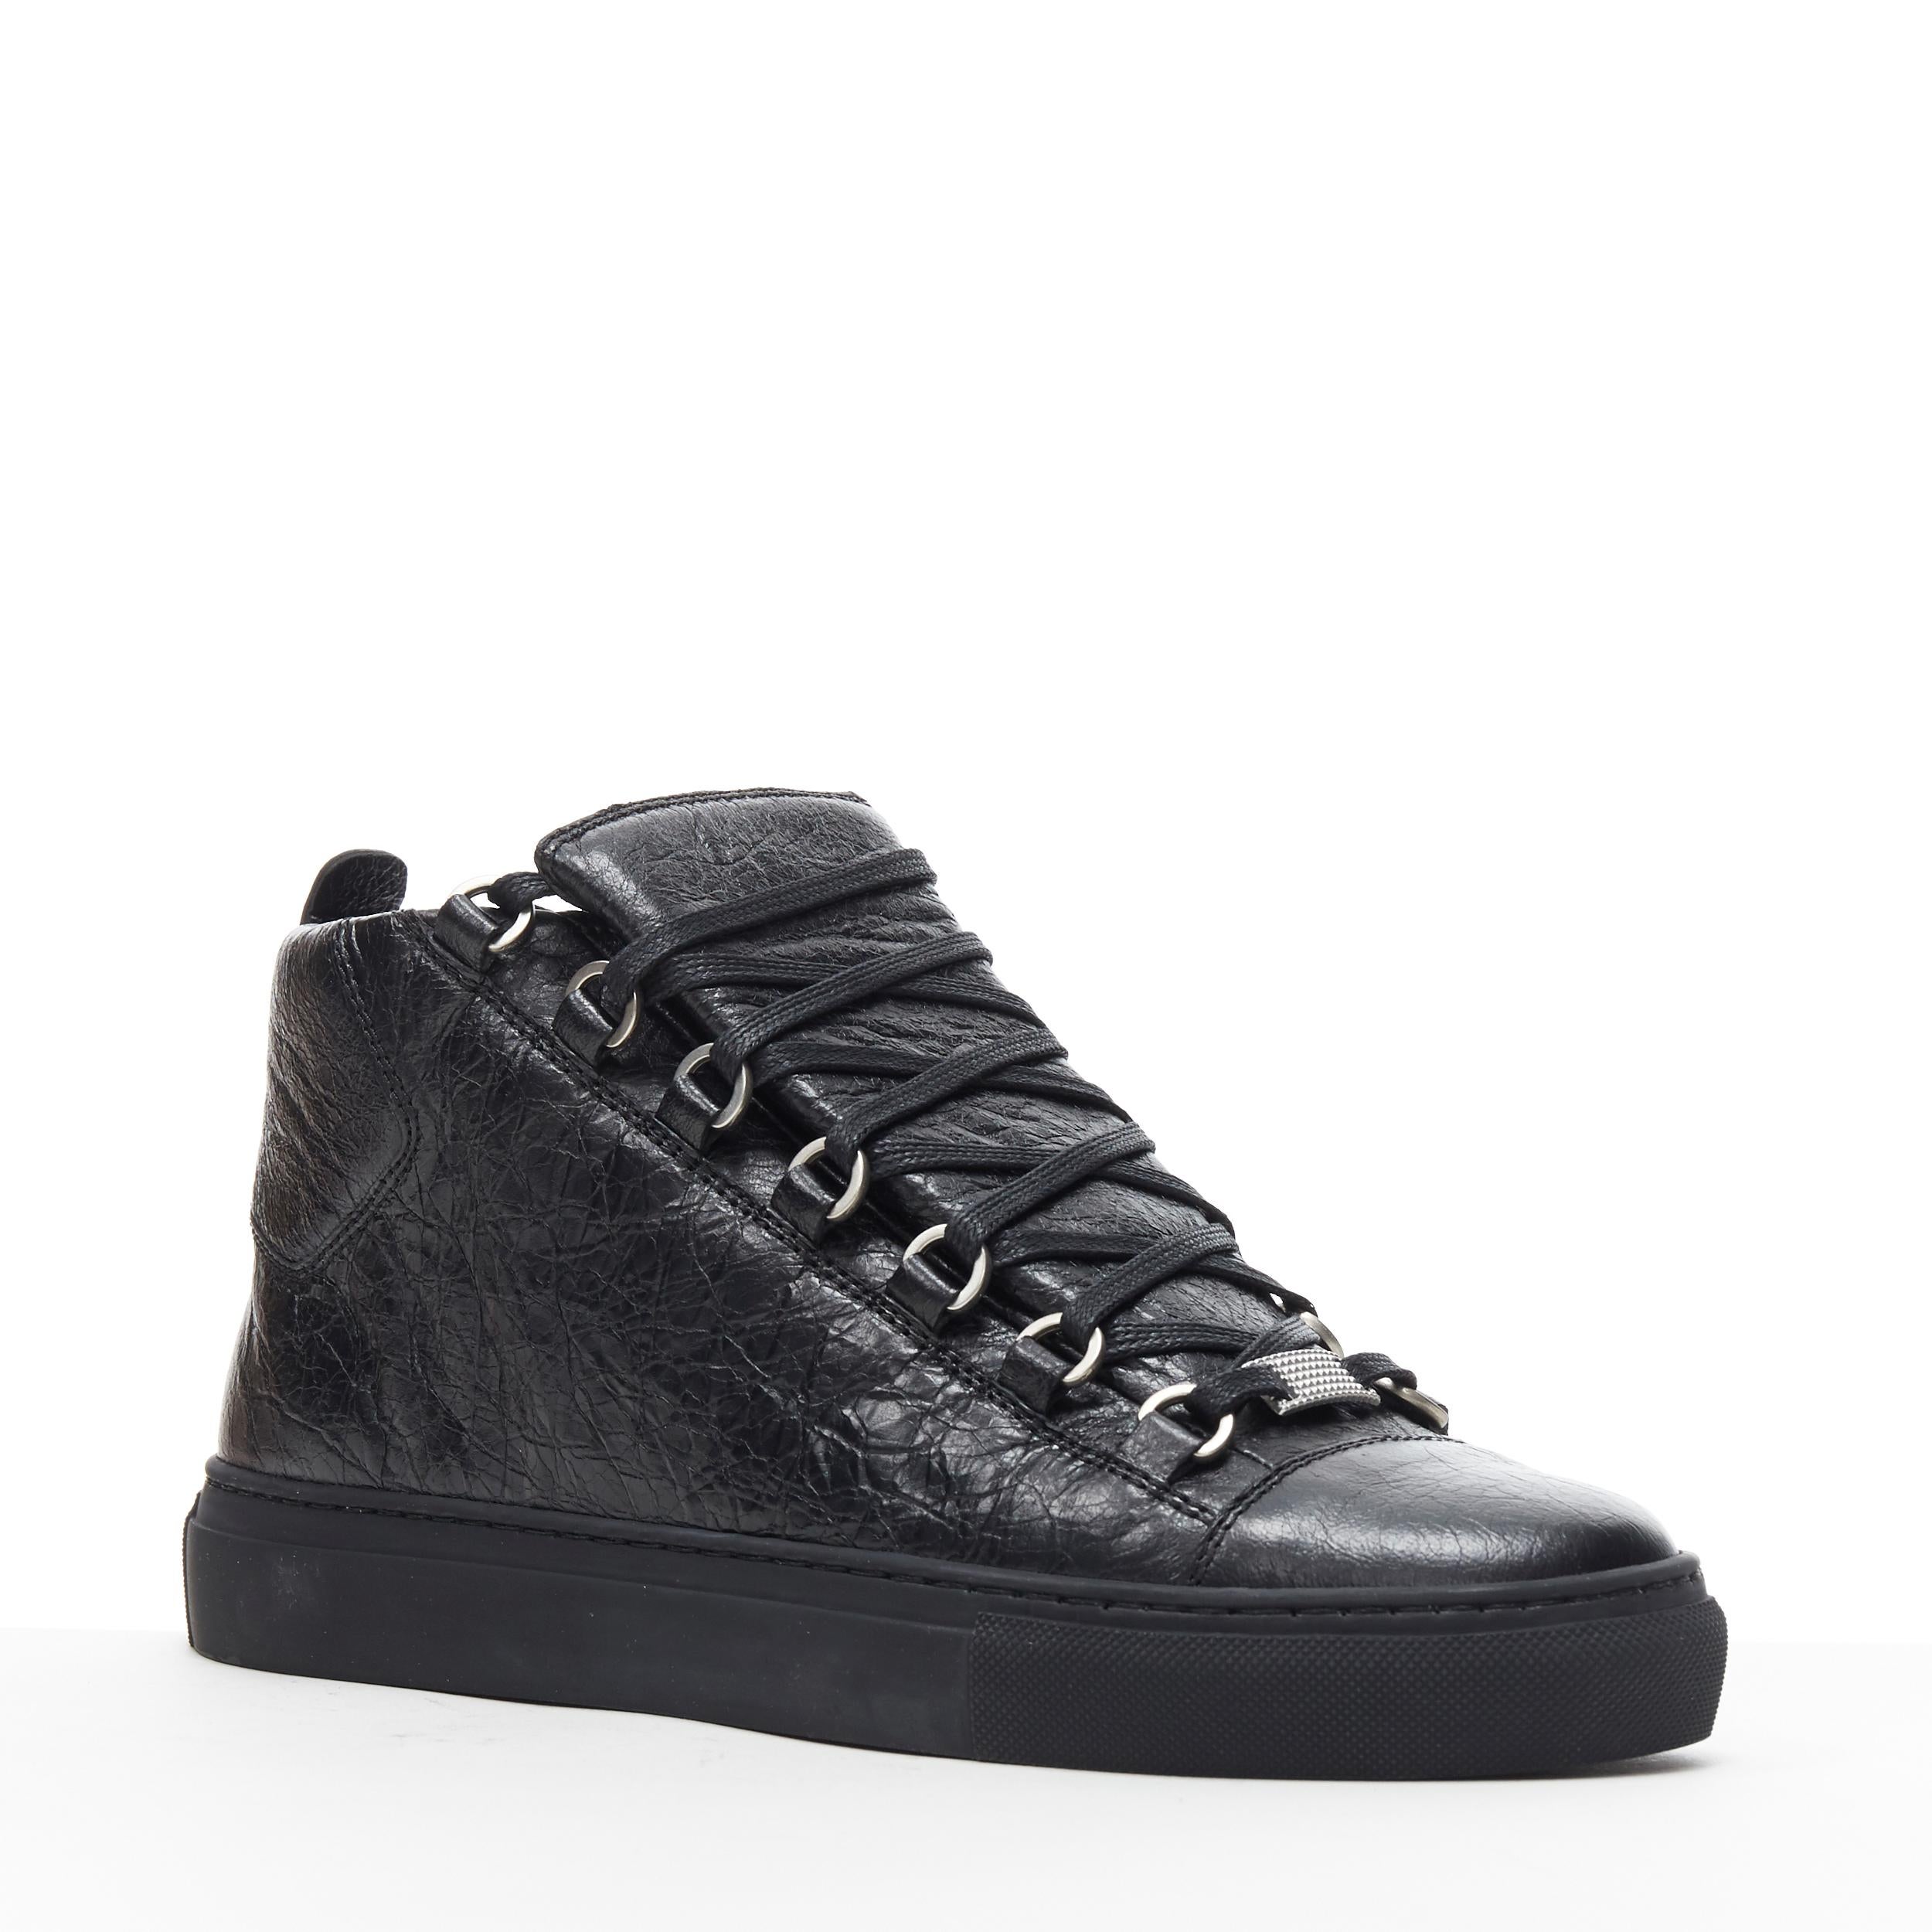 new BALENCIAGA Arena Black Calf high top sneakers EU42 US9 412381 WAY40 1000
Brand: Balenciaga
Model Name / Style: Balenciaga Arena
Material: Leather
Color: Black
Pattern: Solid
Closure: Lace up
Extra Detail: A classic luxury sneaker style from